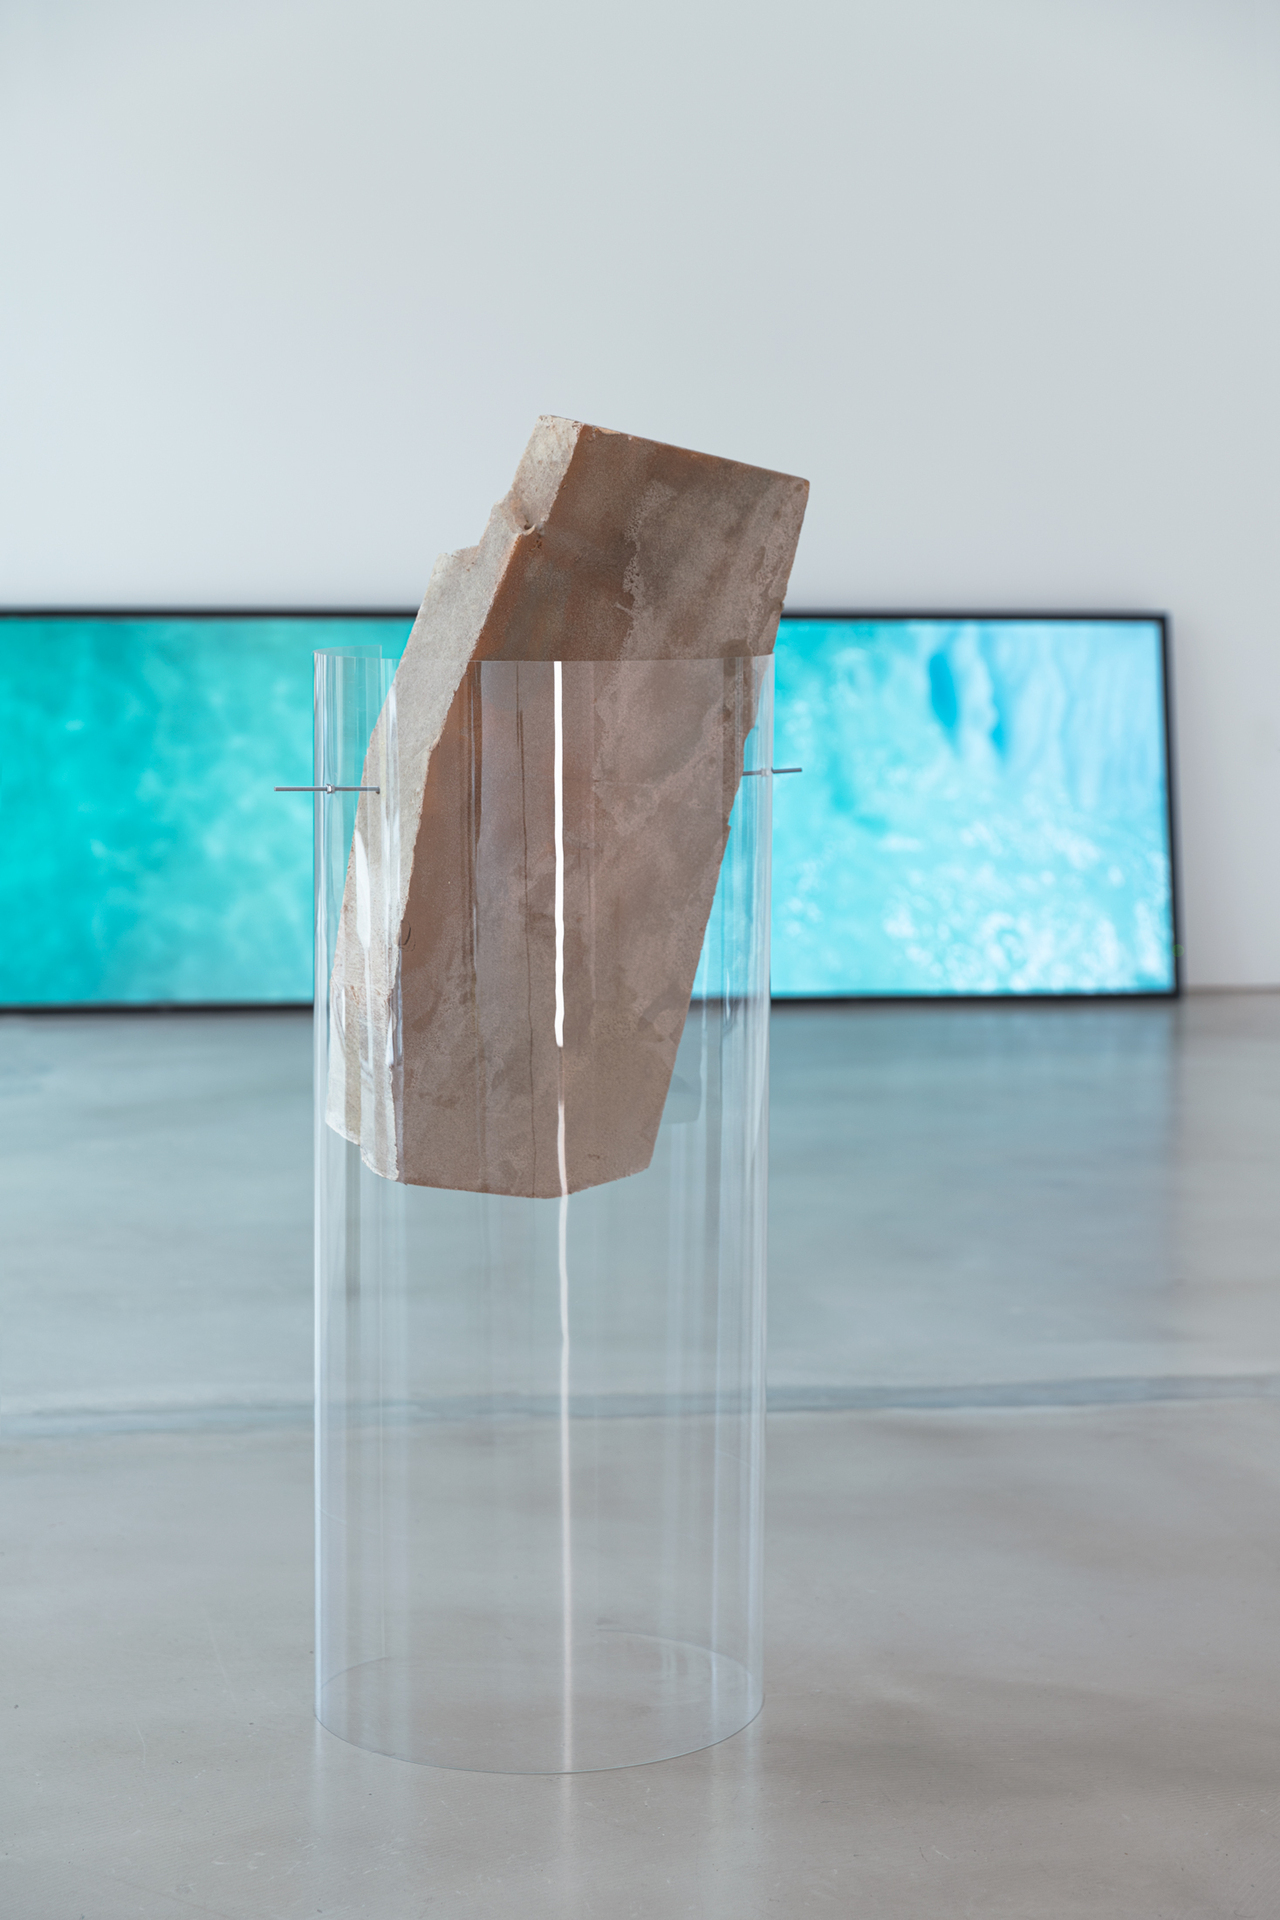 Susi Gelb - Chemical / Mineral Evidence 2, 2020, sand, epoxy resin, aryl, pigments, plastic sheet, steel, 97x45x27 cm